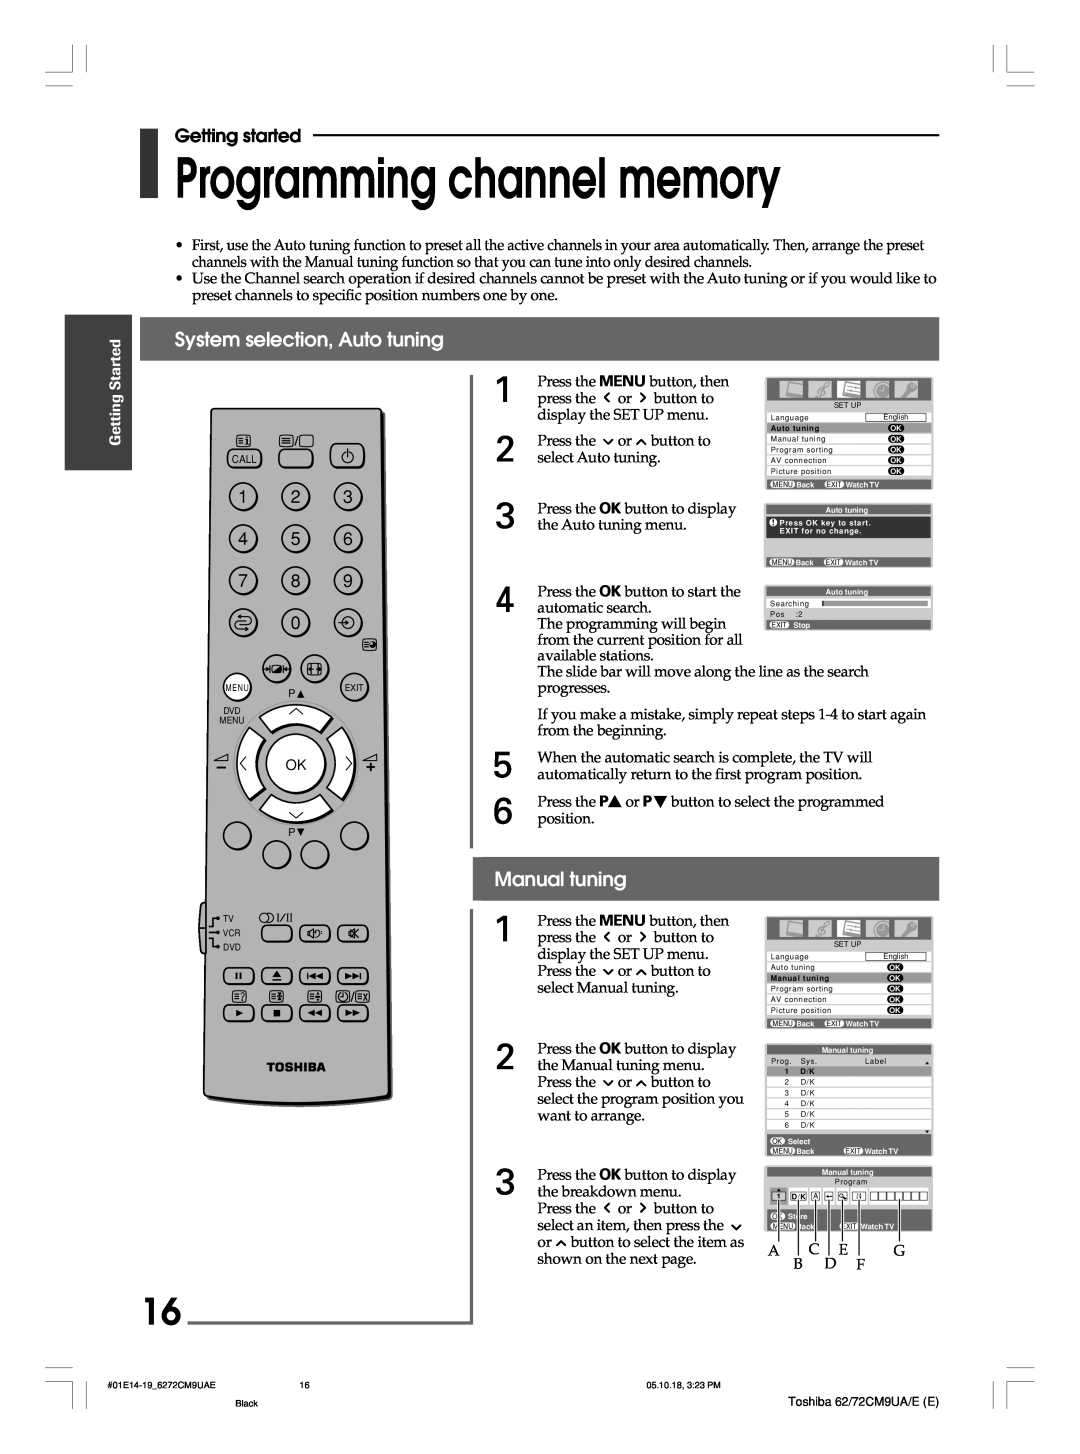 Toshiba 62CM9UA Programming channel memory, System selection, Auto tuning, Manual tuning, 1 2 4 5, Getting started 